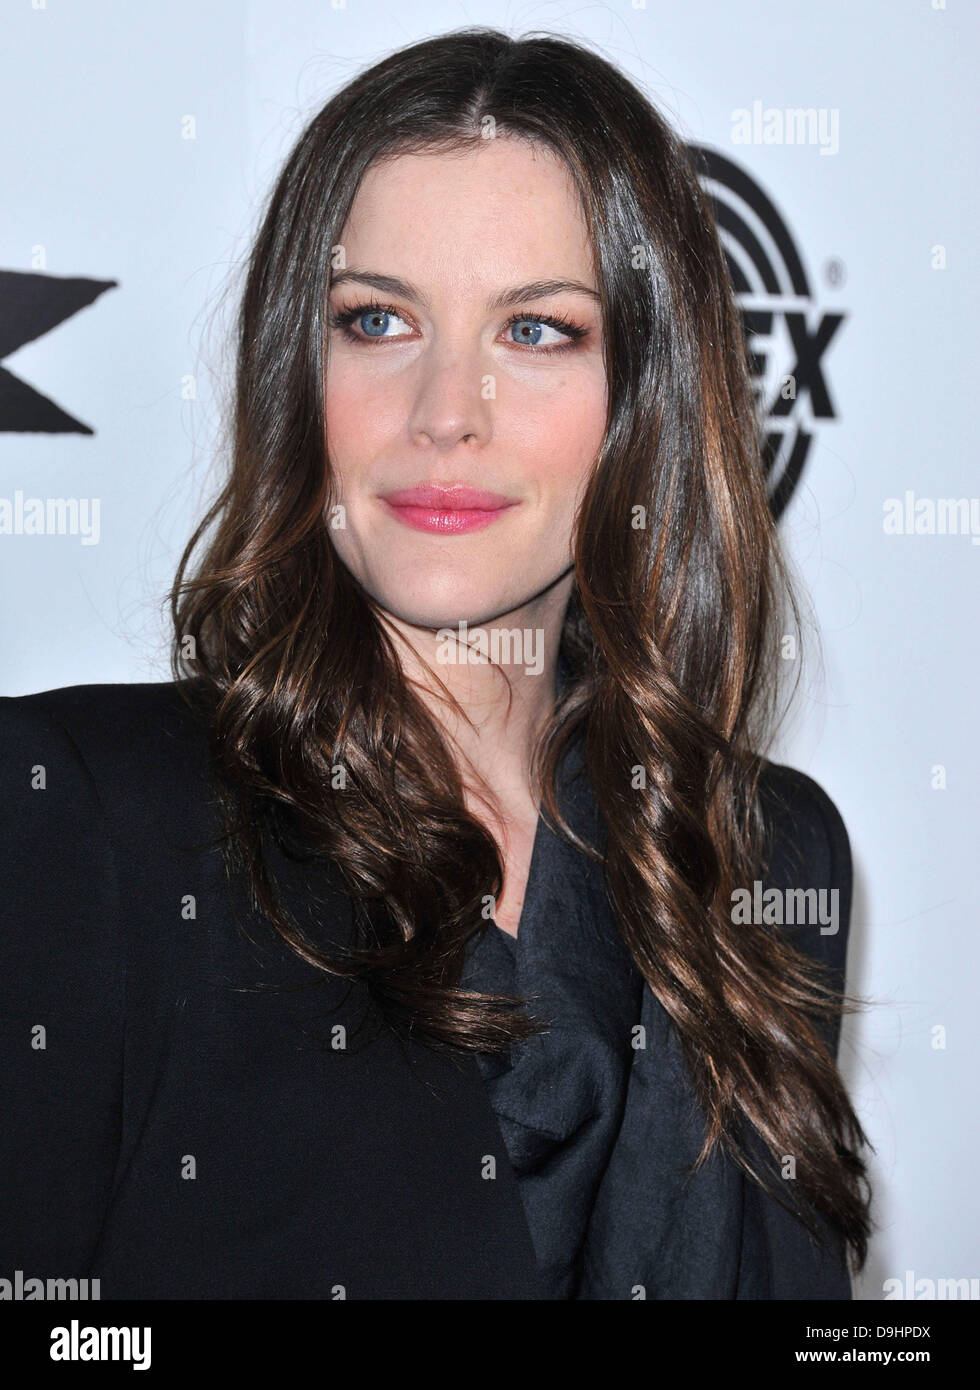 Liv Tyler Los Angeles premiere of 'Super' held at The Egyptian Theatre - Arrivals Los Angeles, California - 21.03.11 Stock Photo